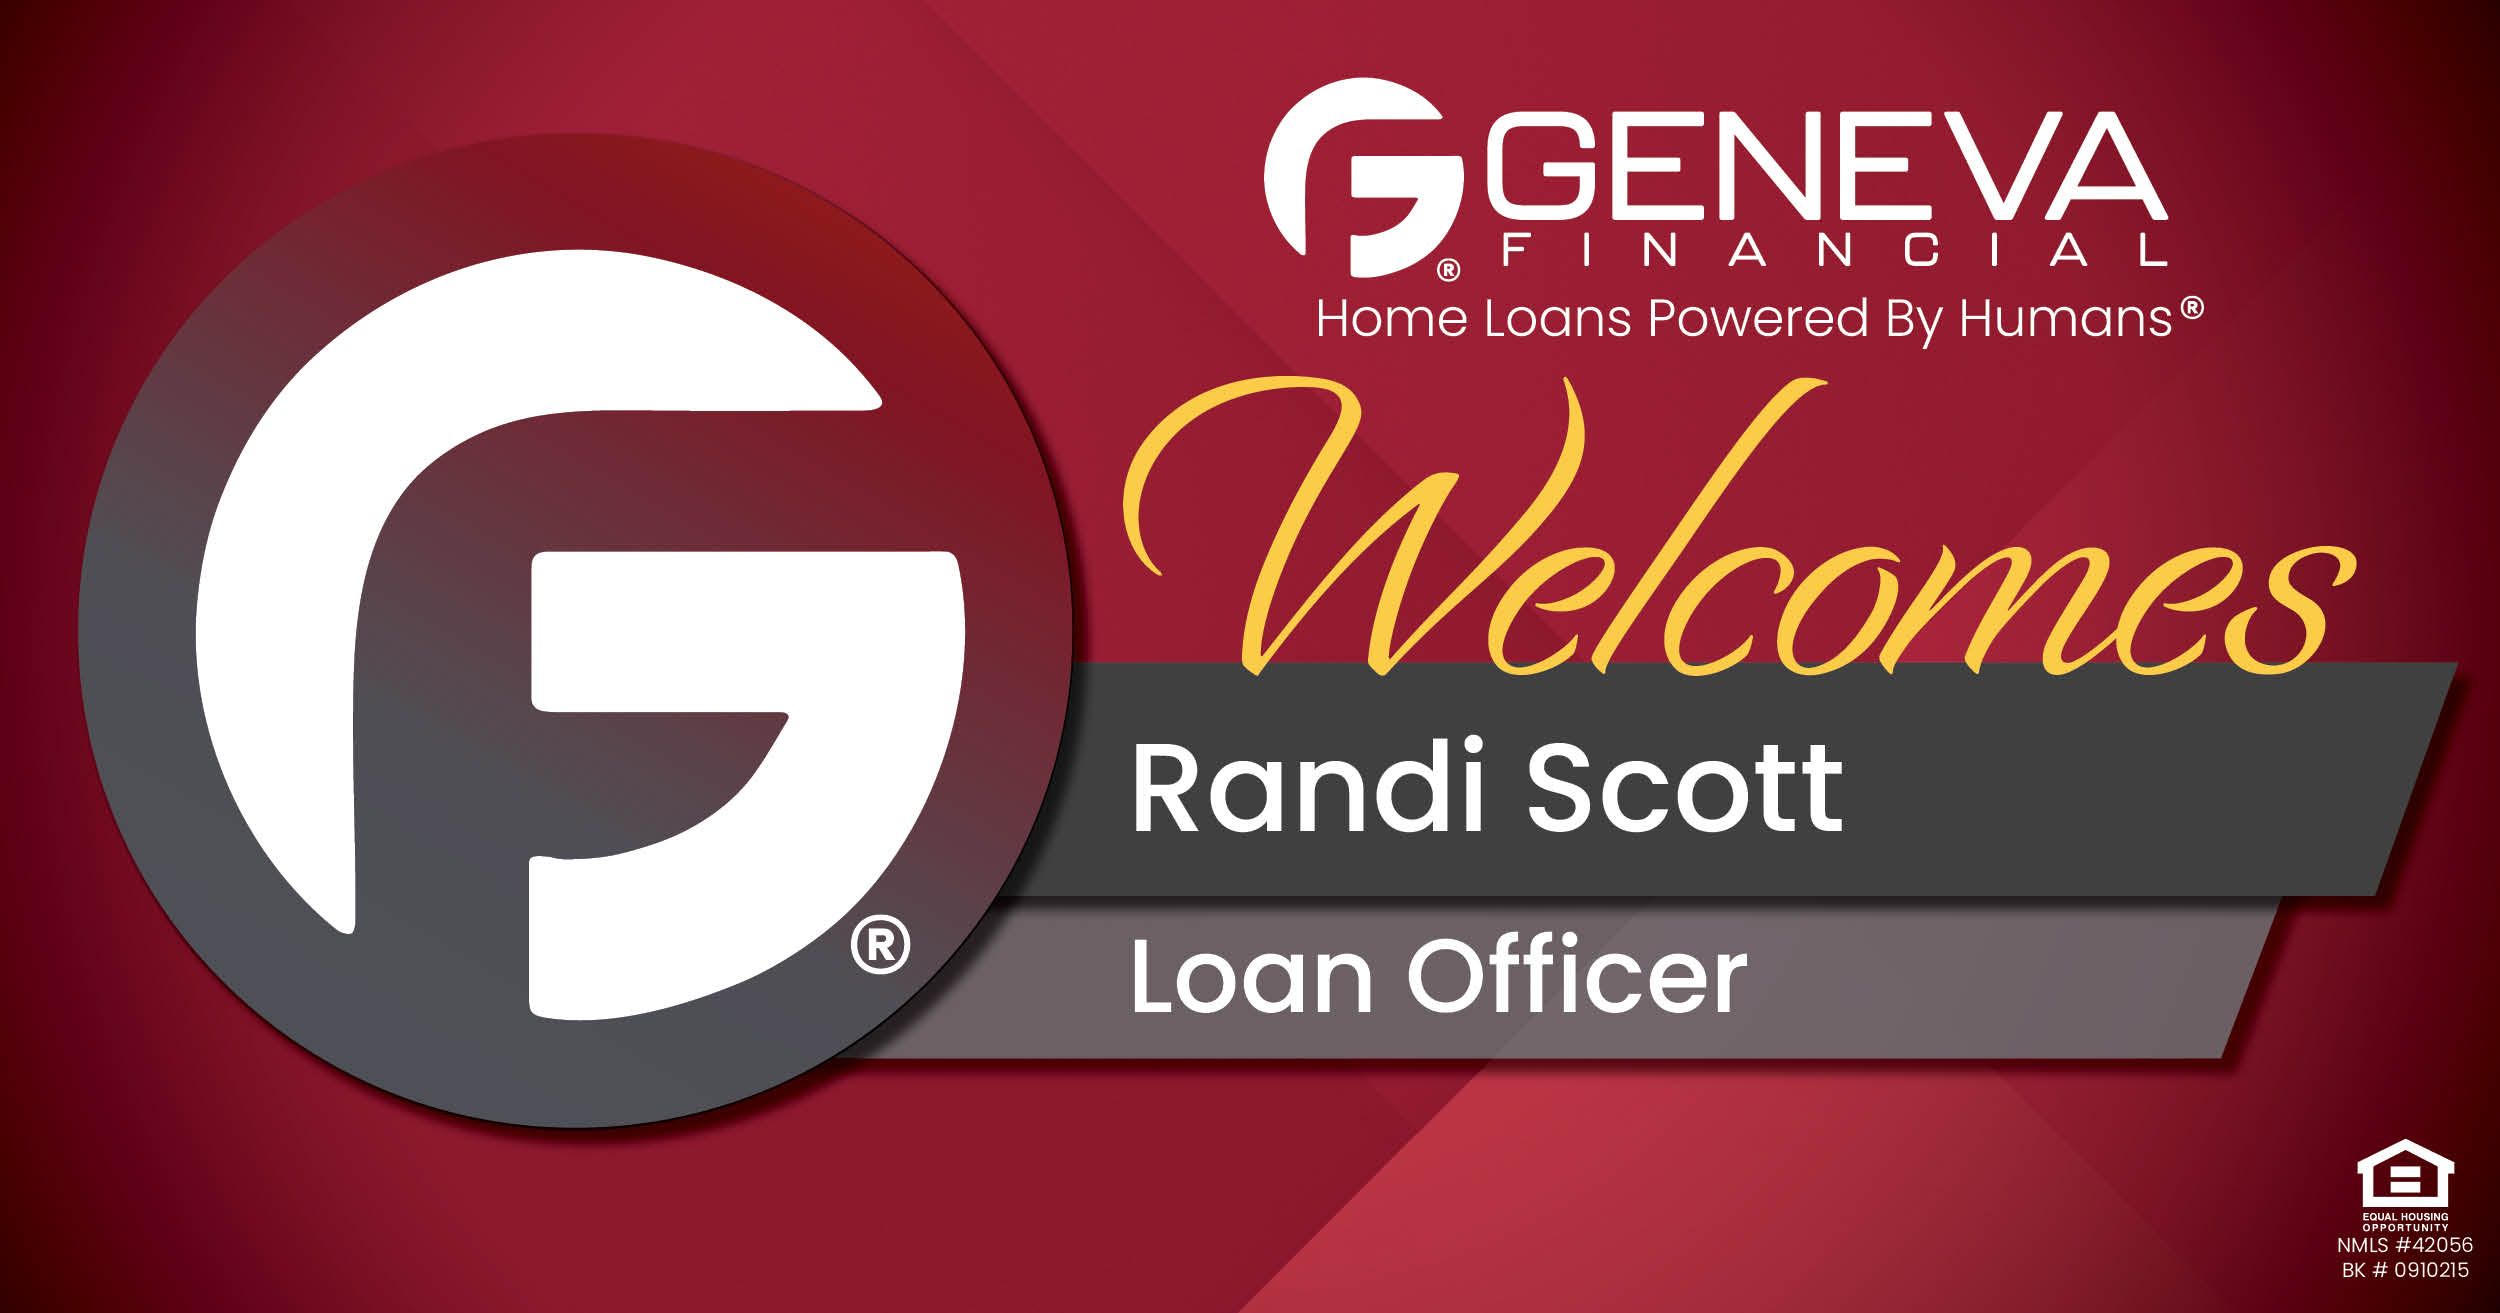 Geneva Financial Welcomes New Loan Officer Randi Scott to Manteno, Illinois – Home Loans Powered by Humans®.